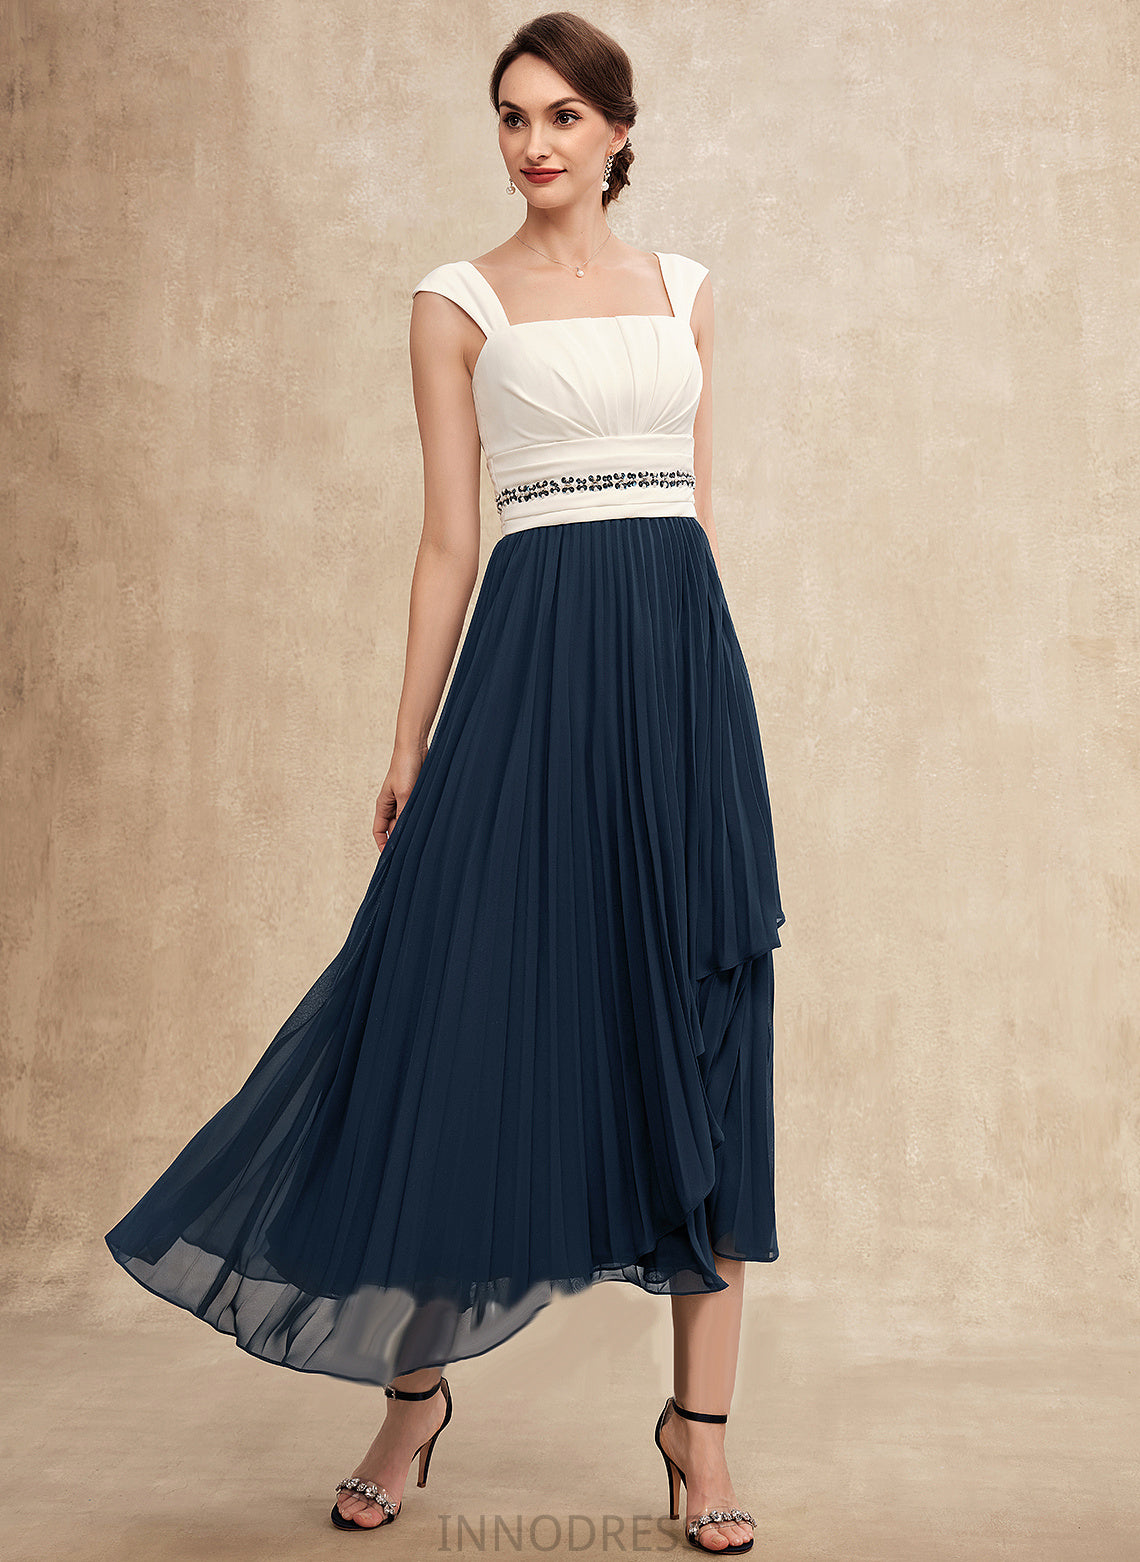 Pleated A-Line of With Beading the Dress Magdalena Square Chiffon Sequins Neckline Mother of the Bride Dresses Mother Tea-Length Bride